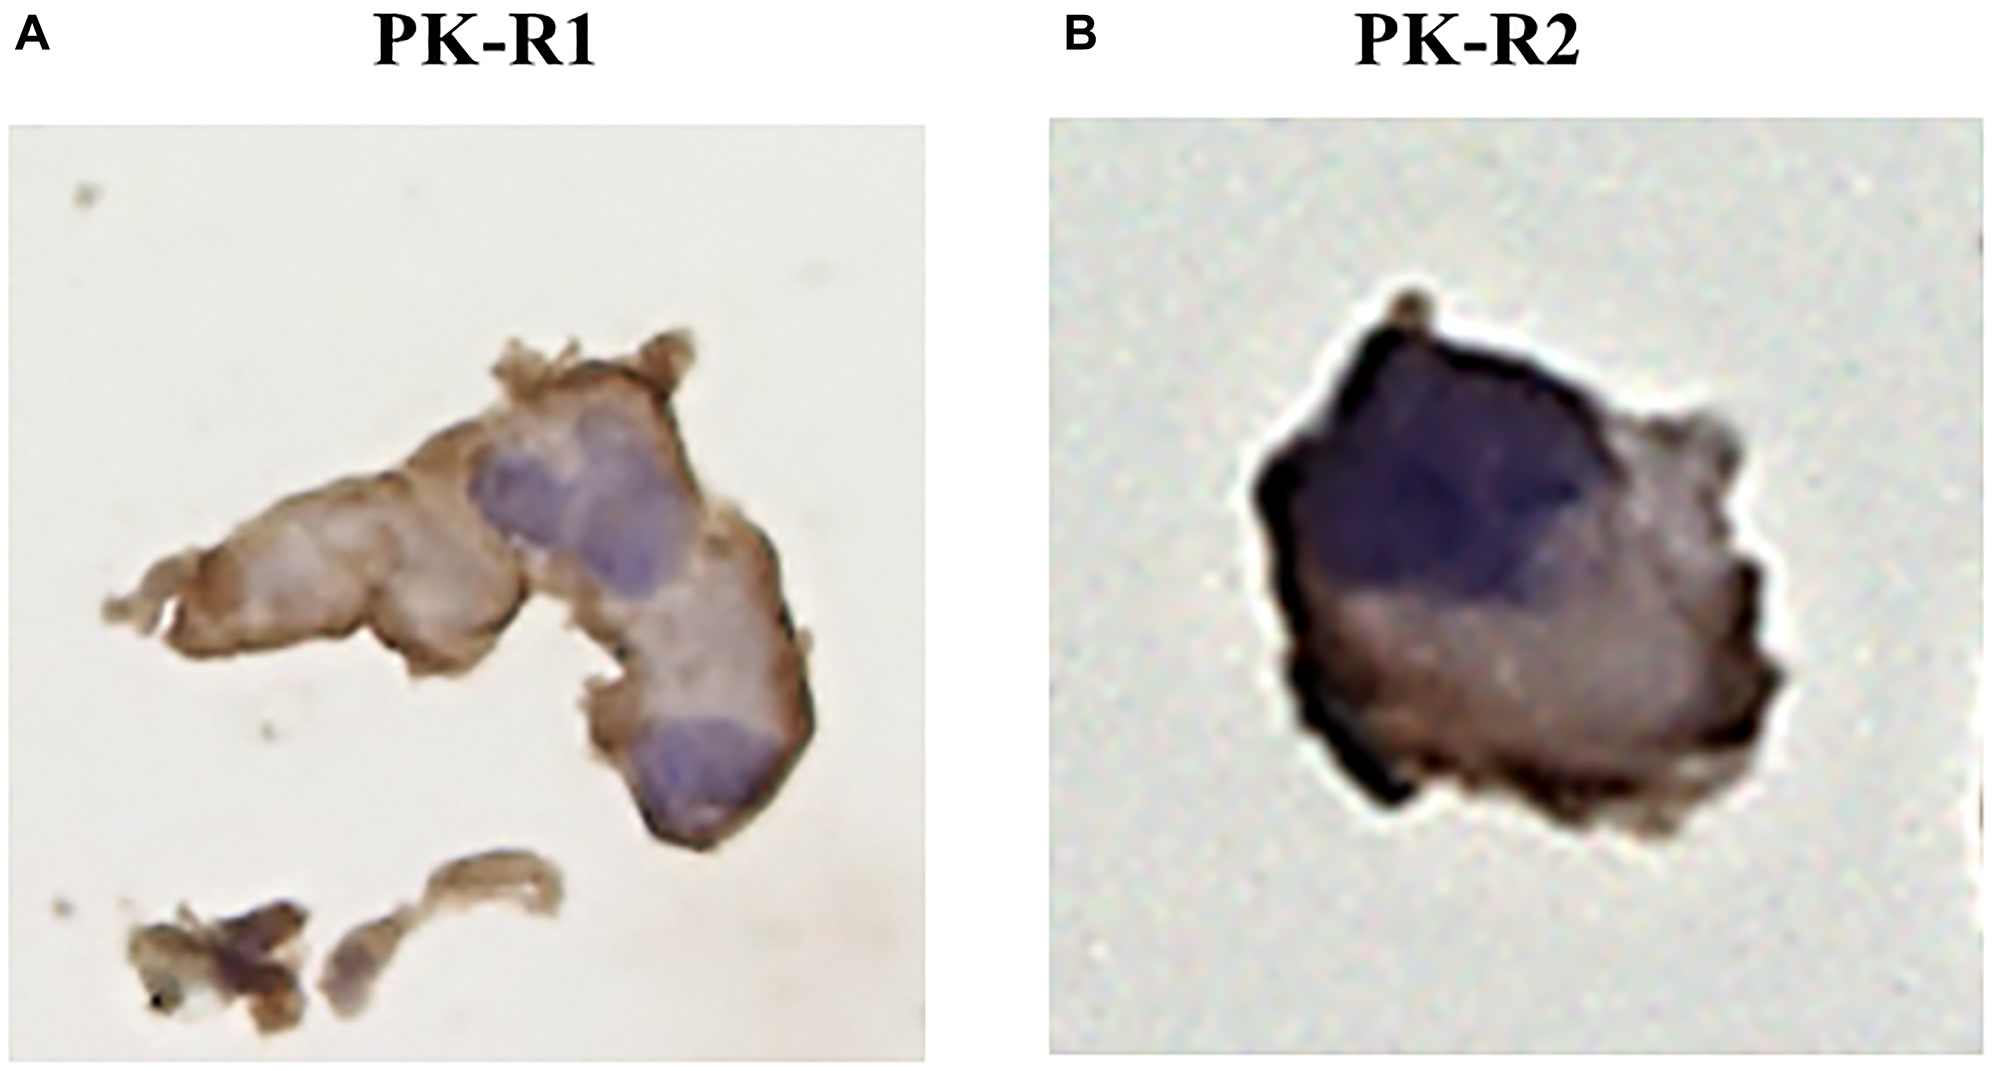 The expression of PK-R proteins in a human lymphatic endothelial cell line by immunohistochemical staining with anti- PK-R1 or PK-R2 mAb.